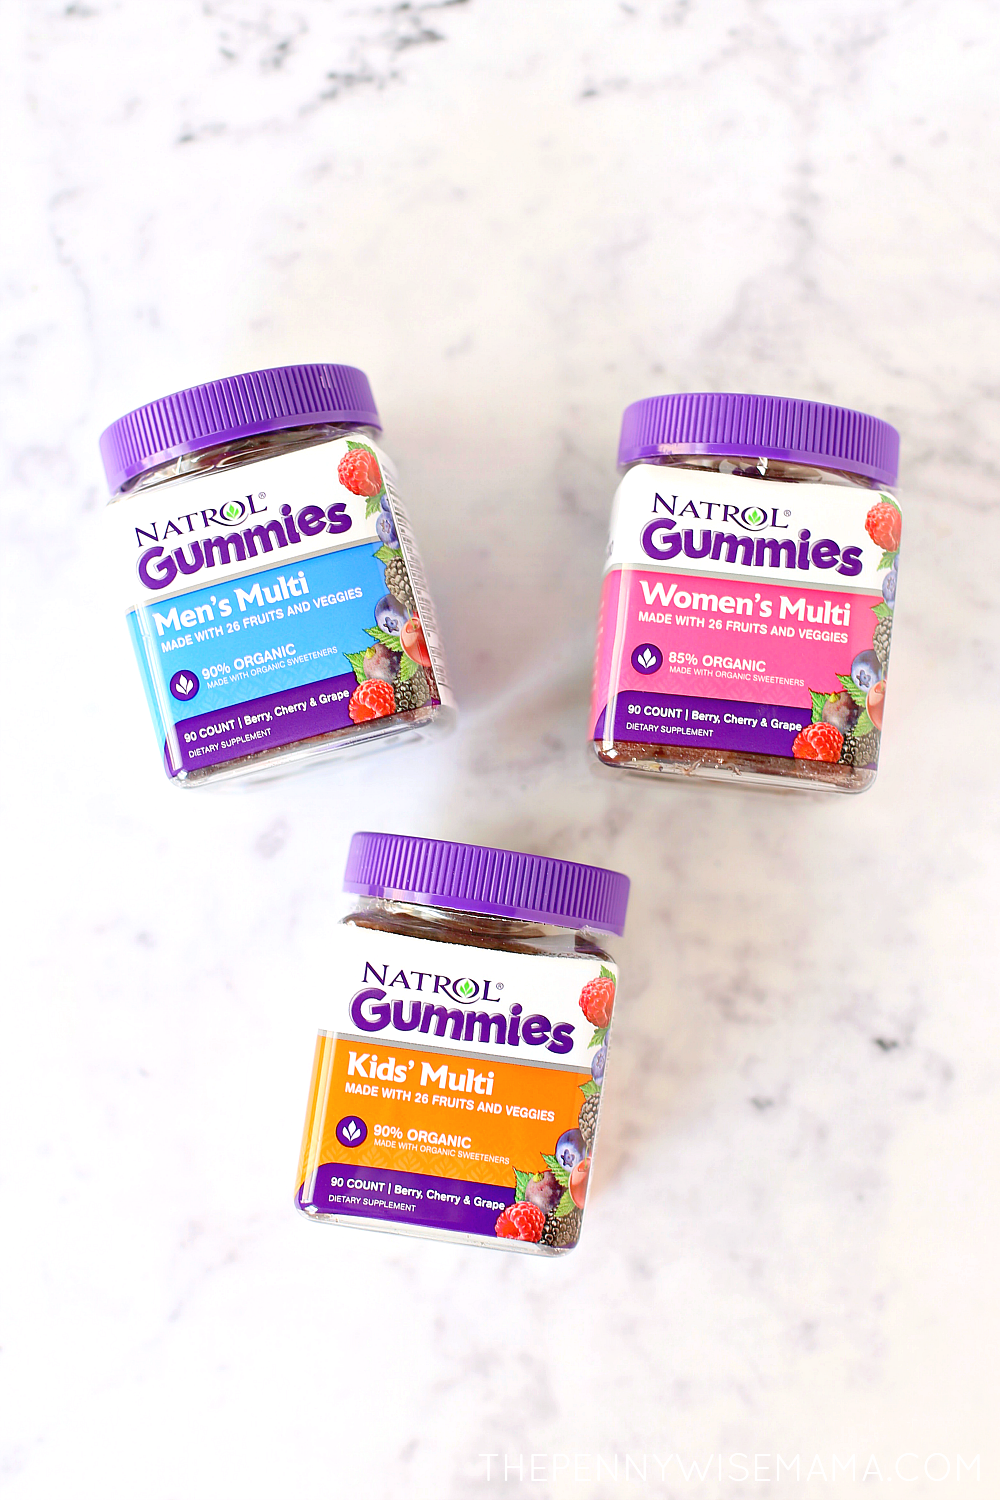 Natrol Gummy Vitamins for the Whole Family